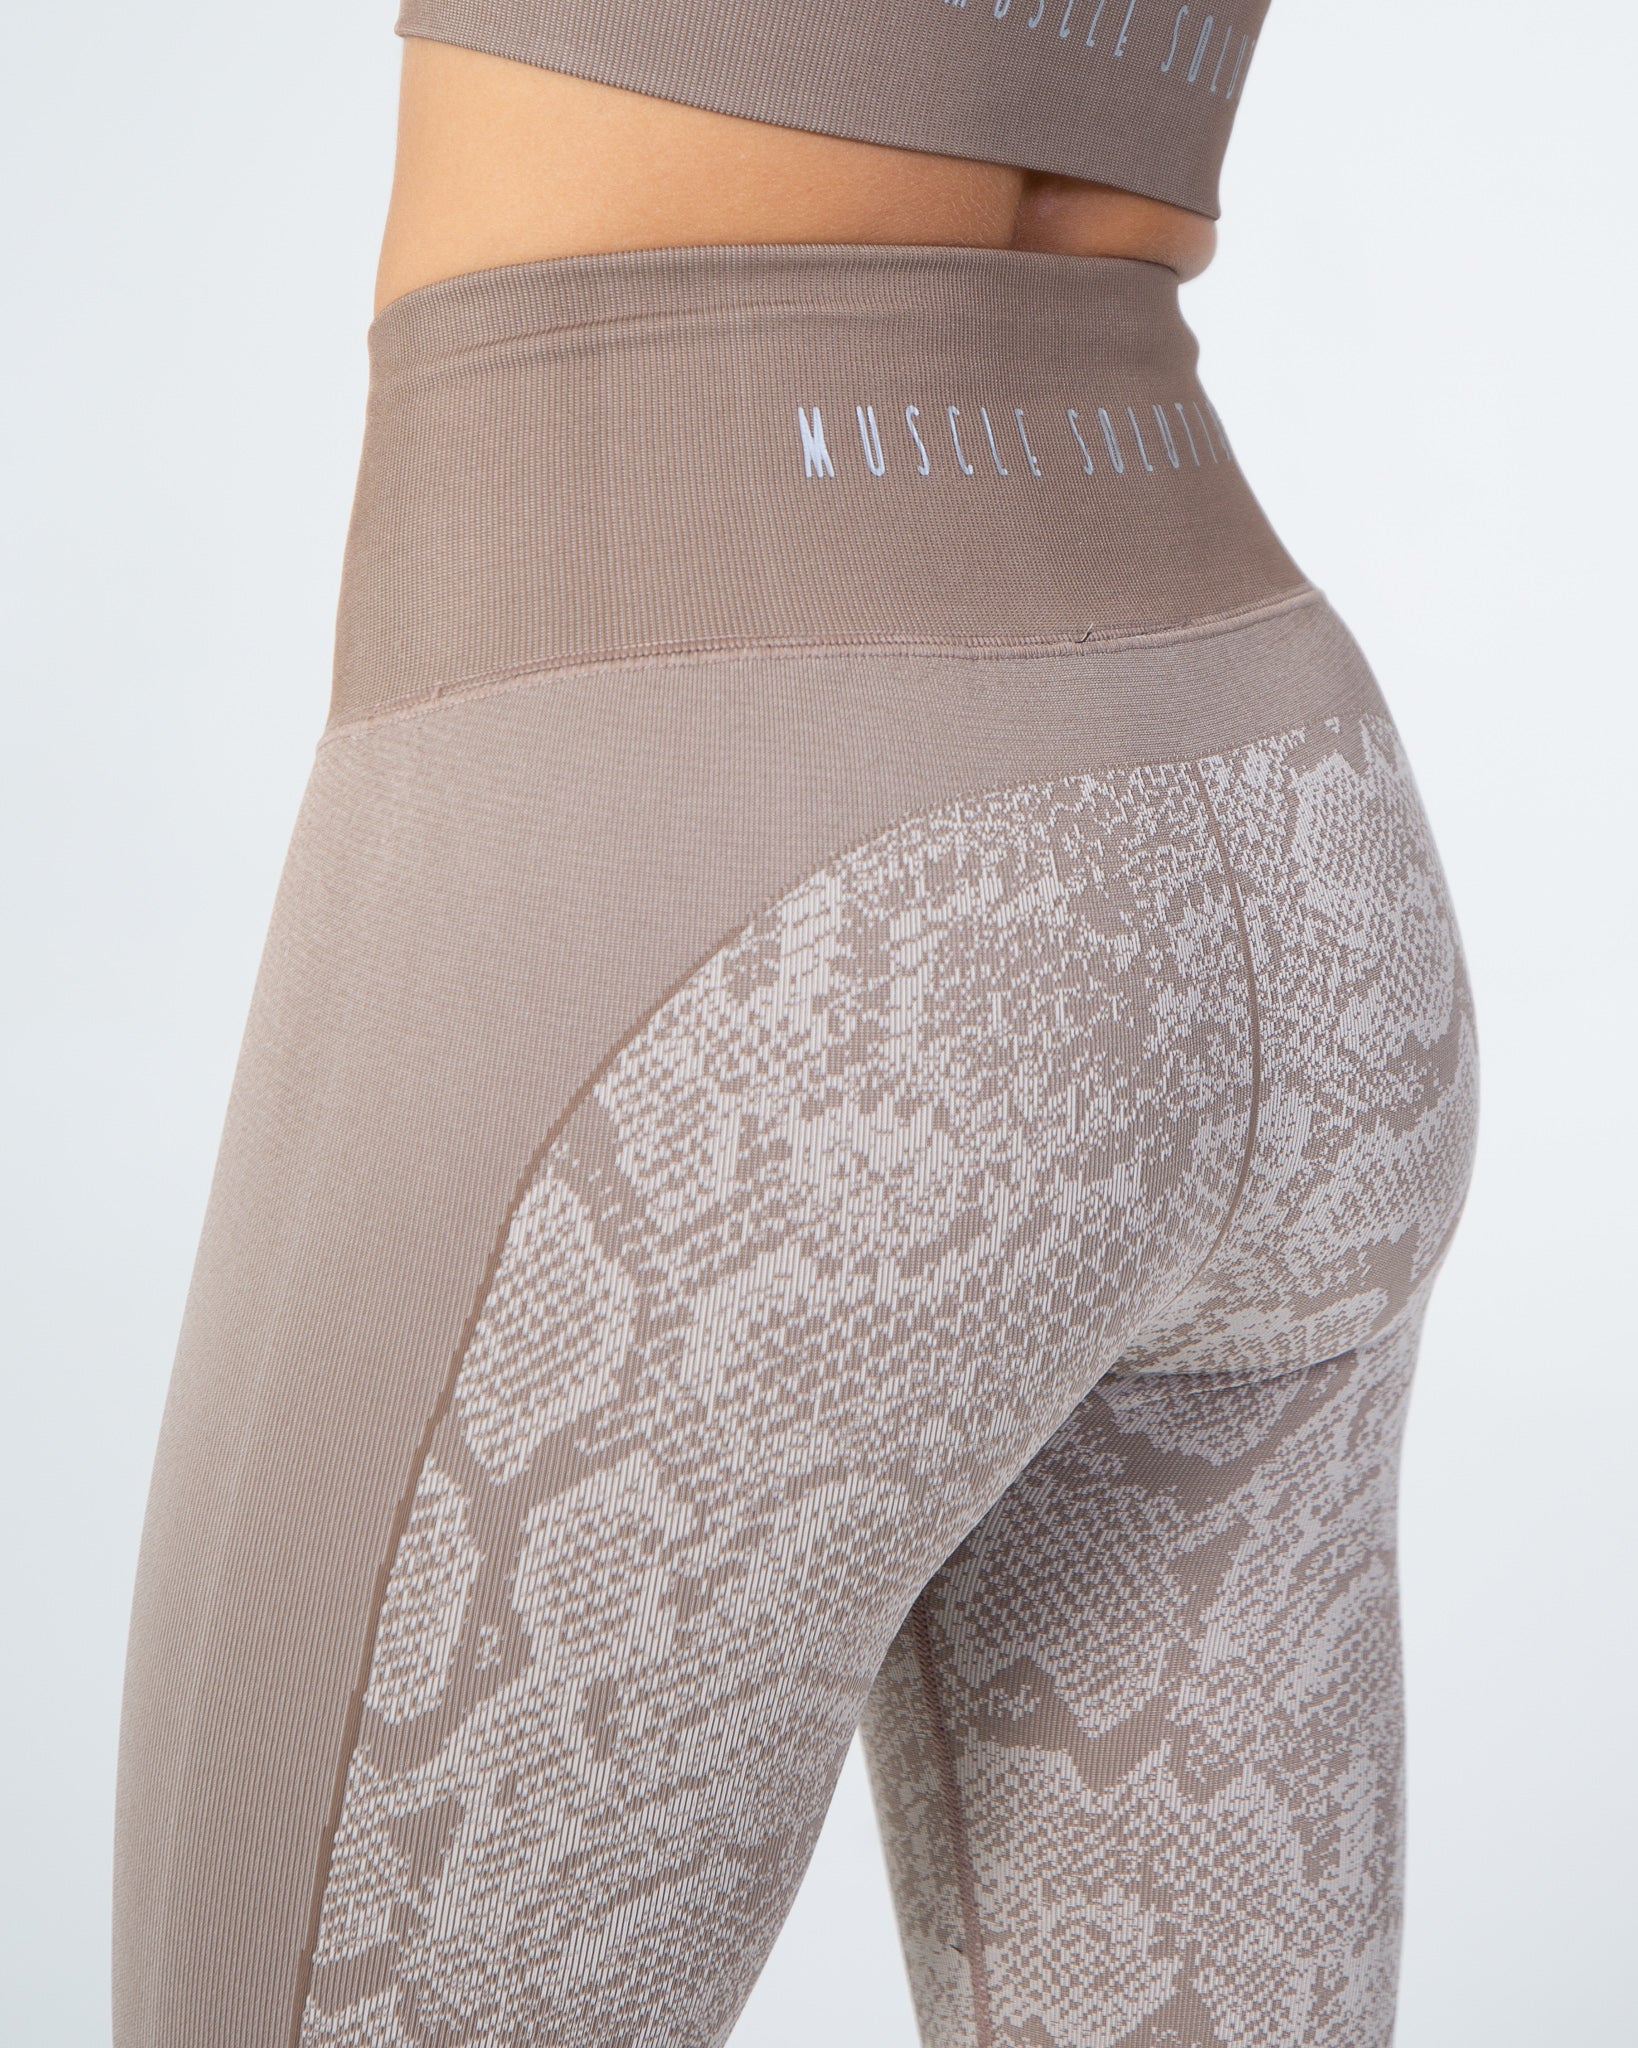 Seamlessly Wild Leggings – MUSCLE SOLUTION